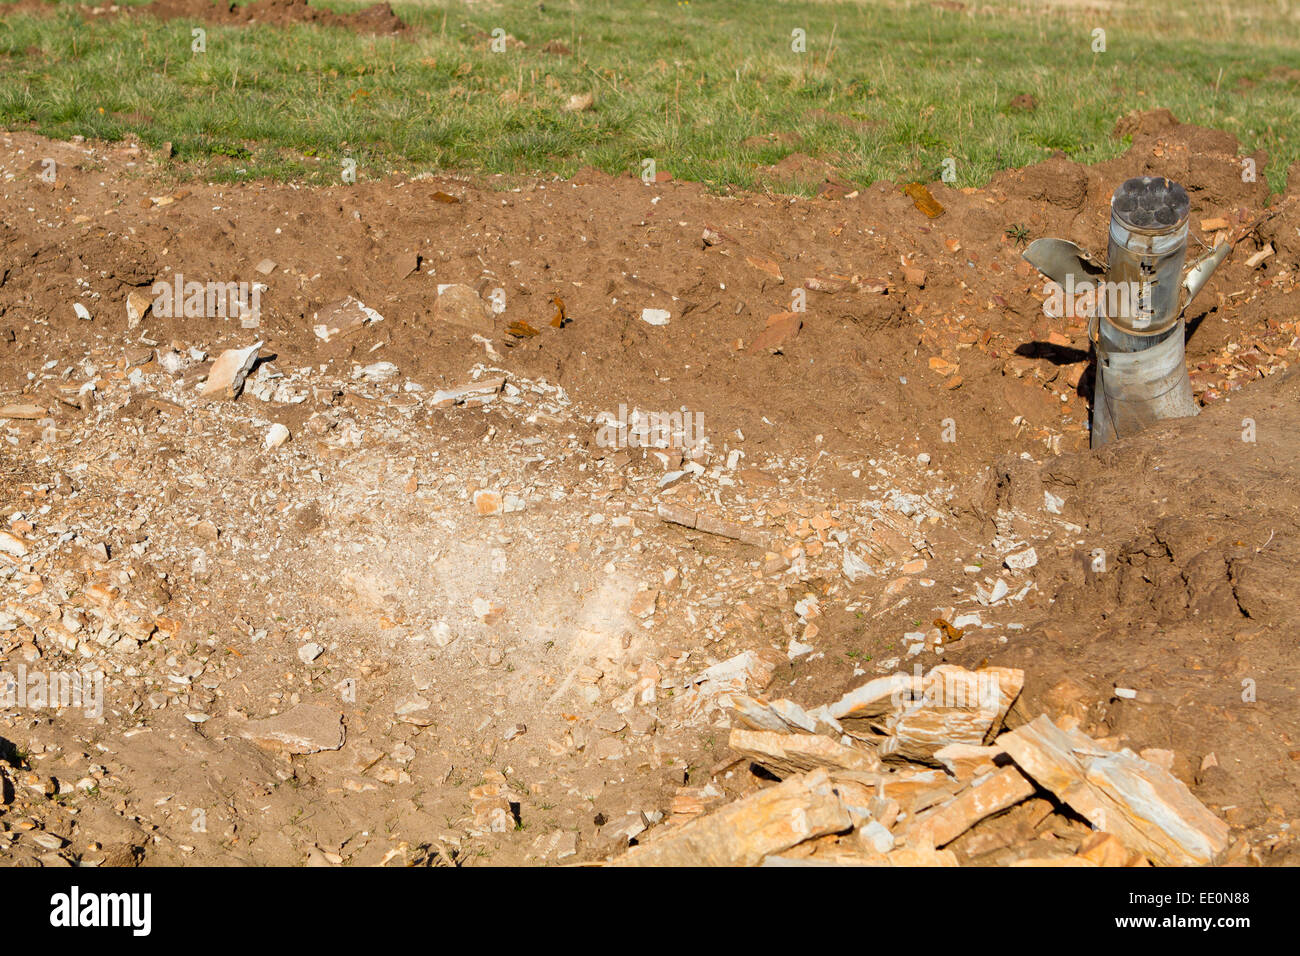 unexploded ordnance from multiple rocket launchers degrees in Donetsk Stock Photo